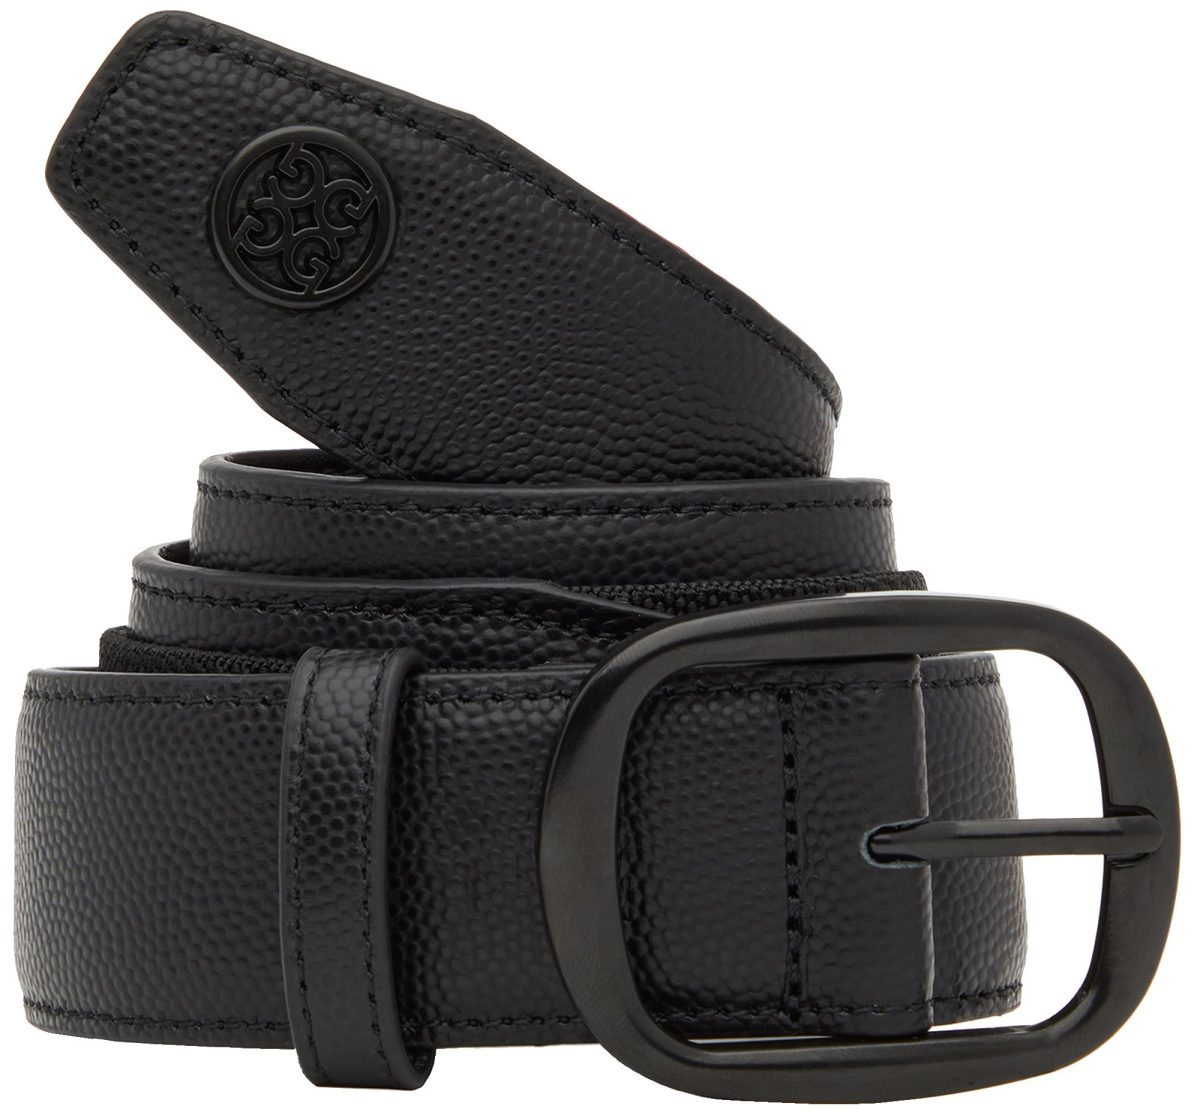 G/FORE Men's Circle Gs Webbed Golf Belts, Nylon in Onyx, Size 38